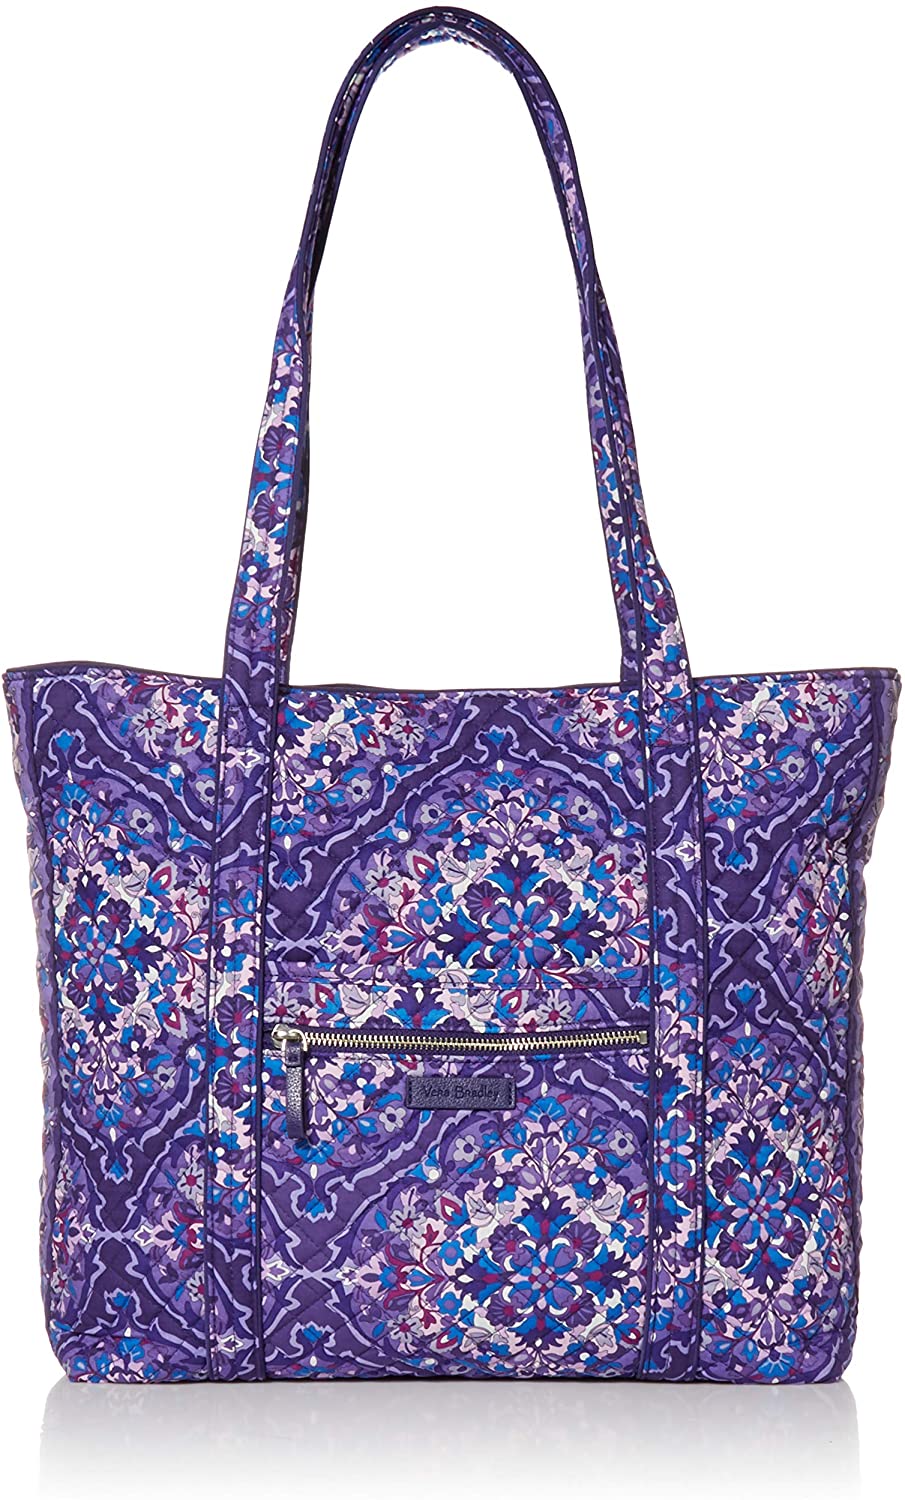 Up to 50 Off Vera Bradley bags at the Amazon Summer Sale